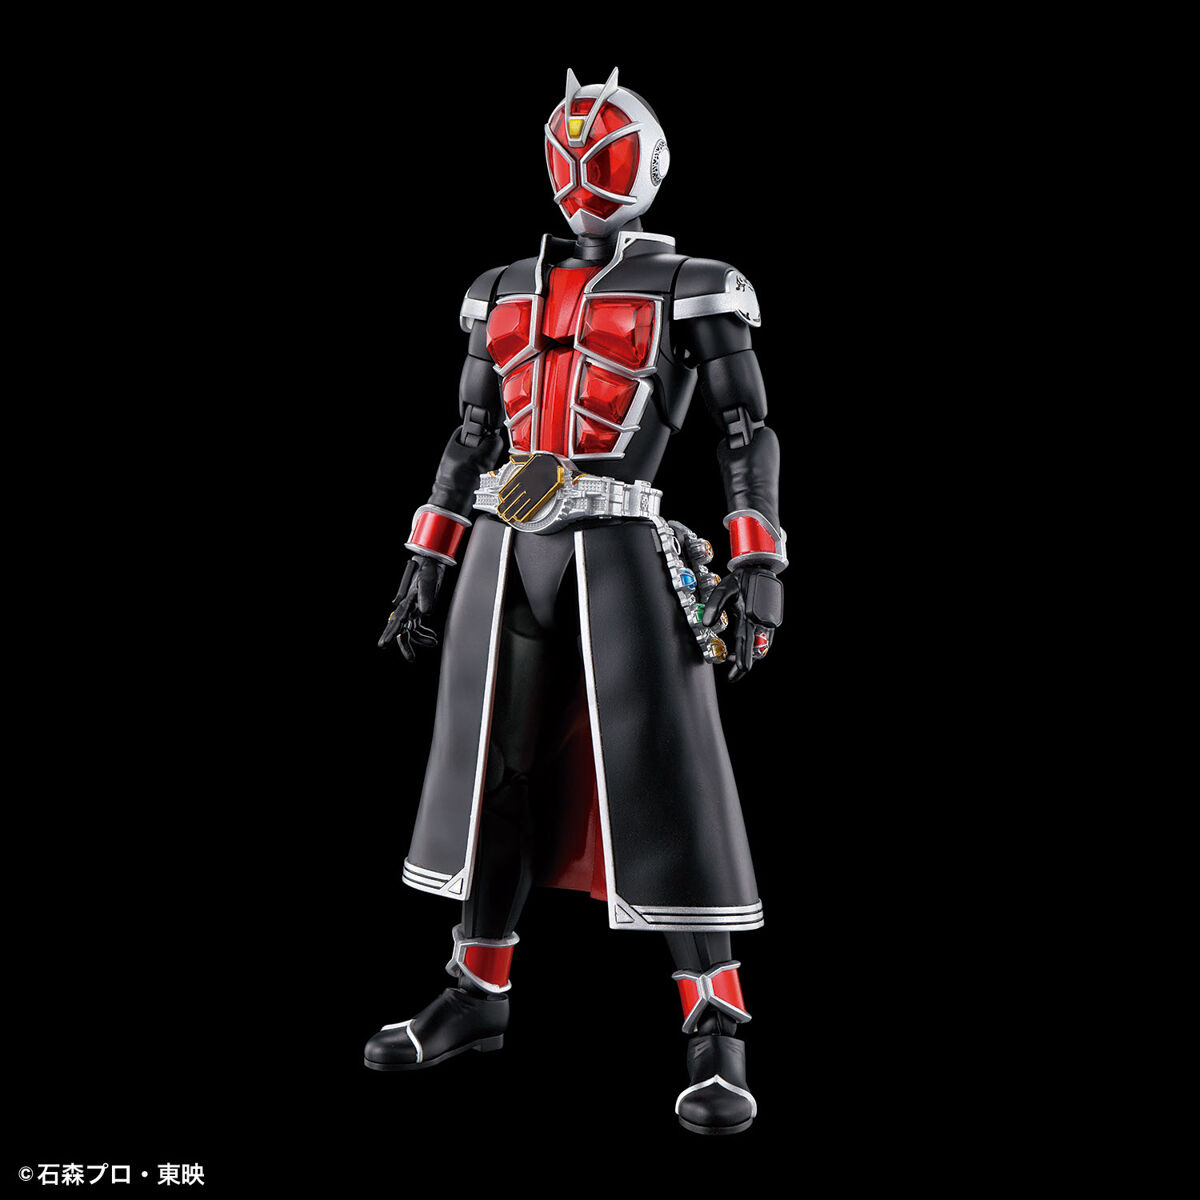 Kamen Rider Figure Rise Standard Wizard Flame Style-Bandai-Ace Cards & Collectibles